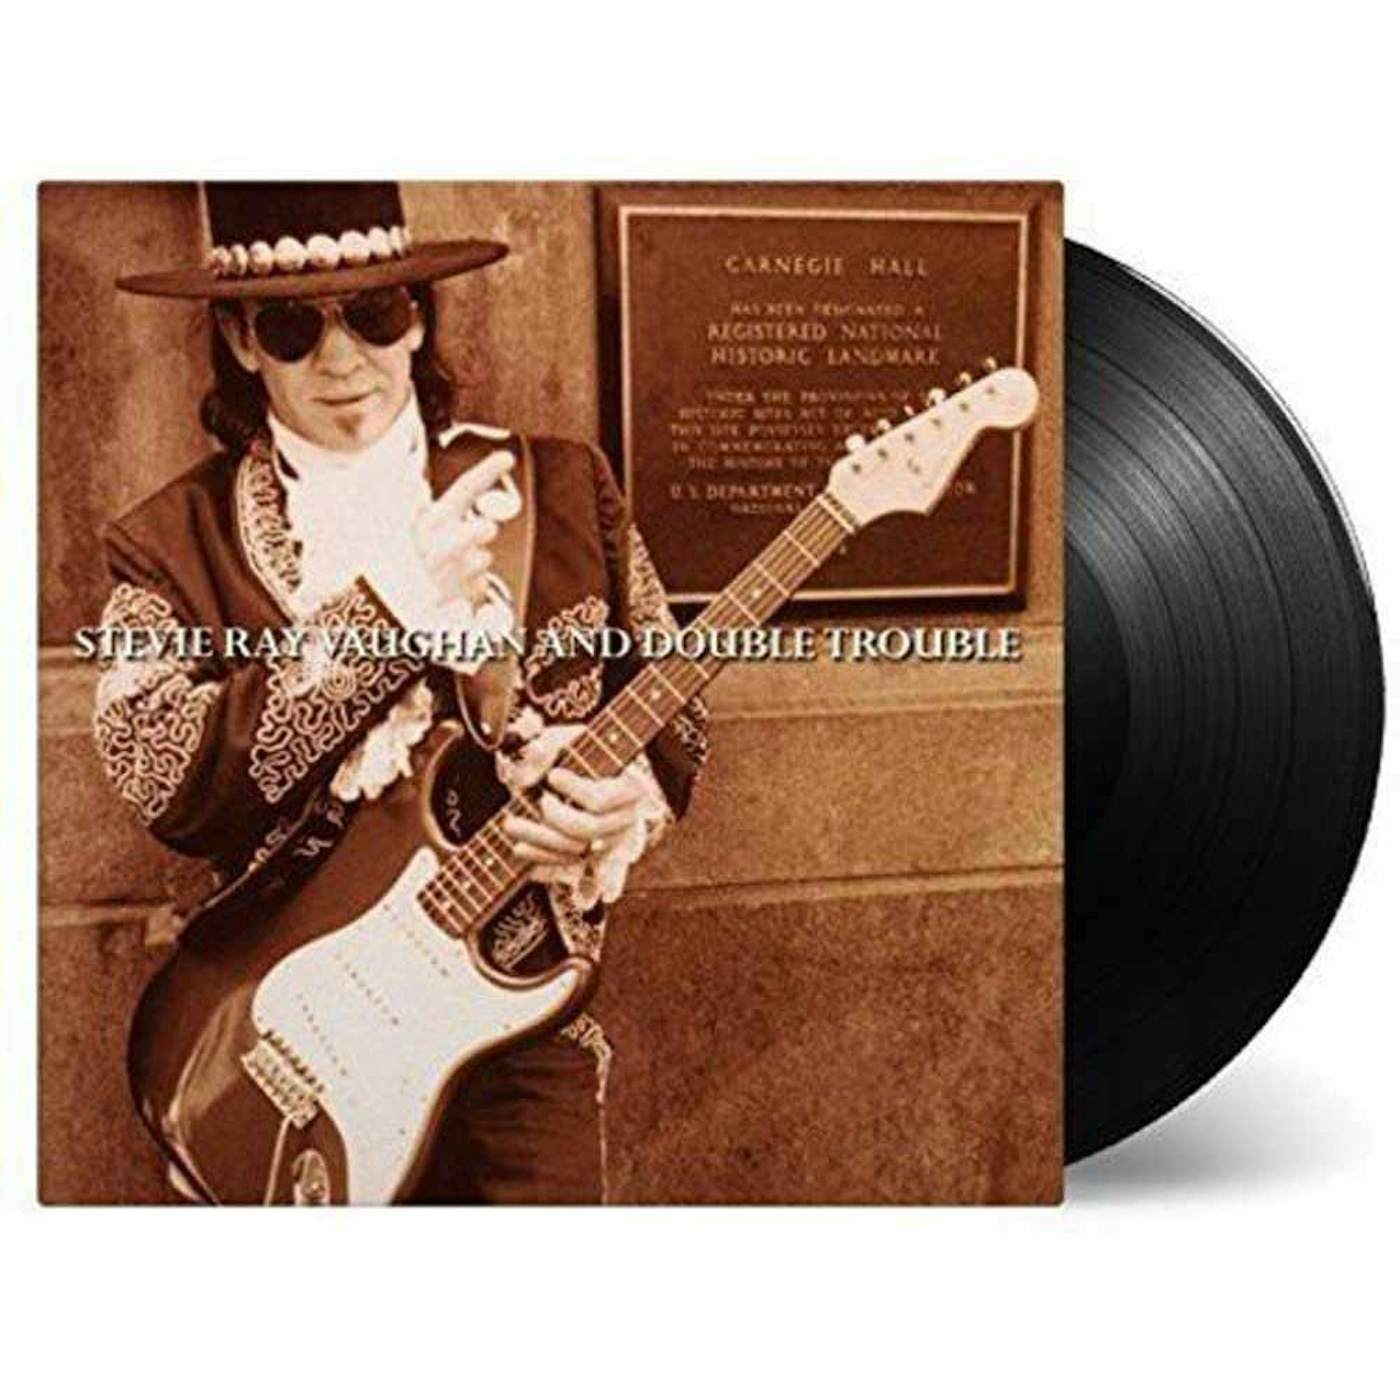 Stevie Ray Vaughan LIVE AT CARNEGIE HALL (180G) Vinyl Record